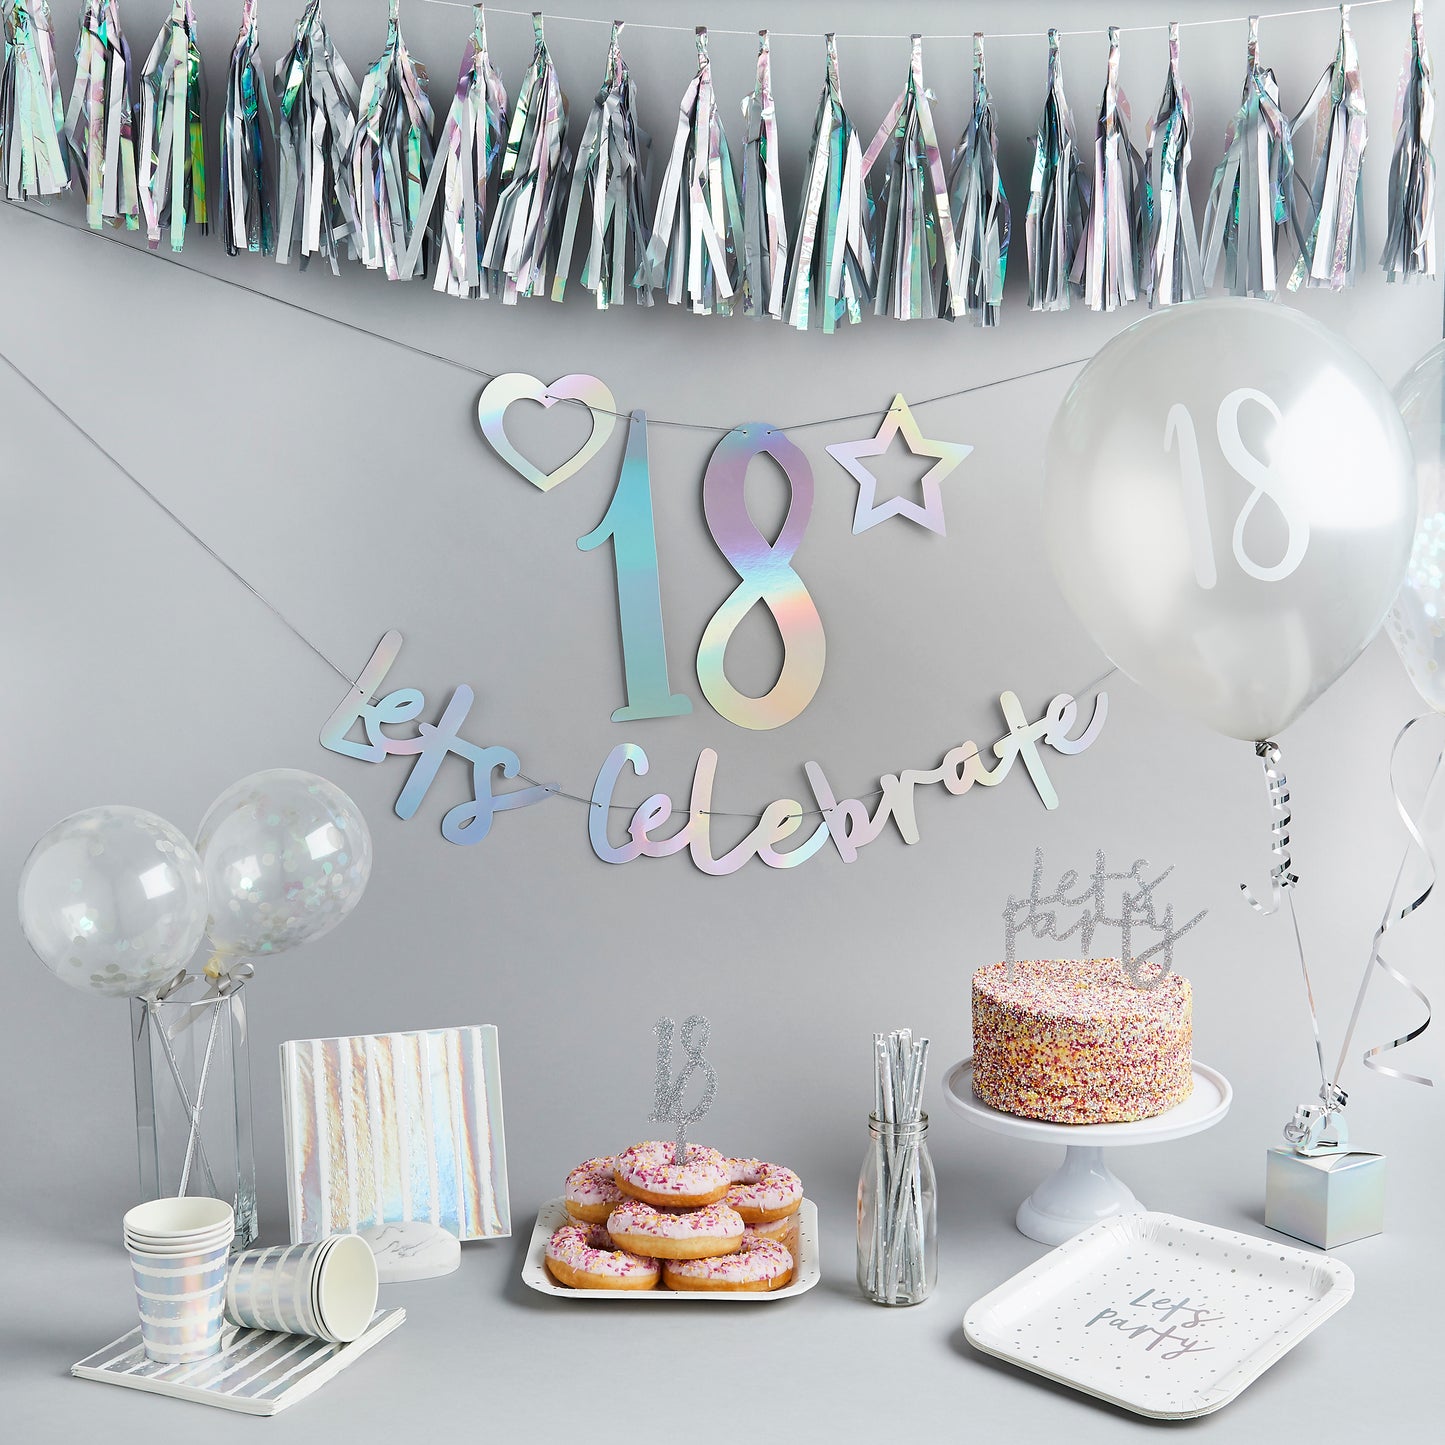 Hootyballoo 5 Pack Silver Number '50' Balloons Party Decorations Partyware